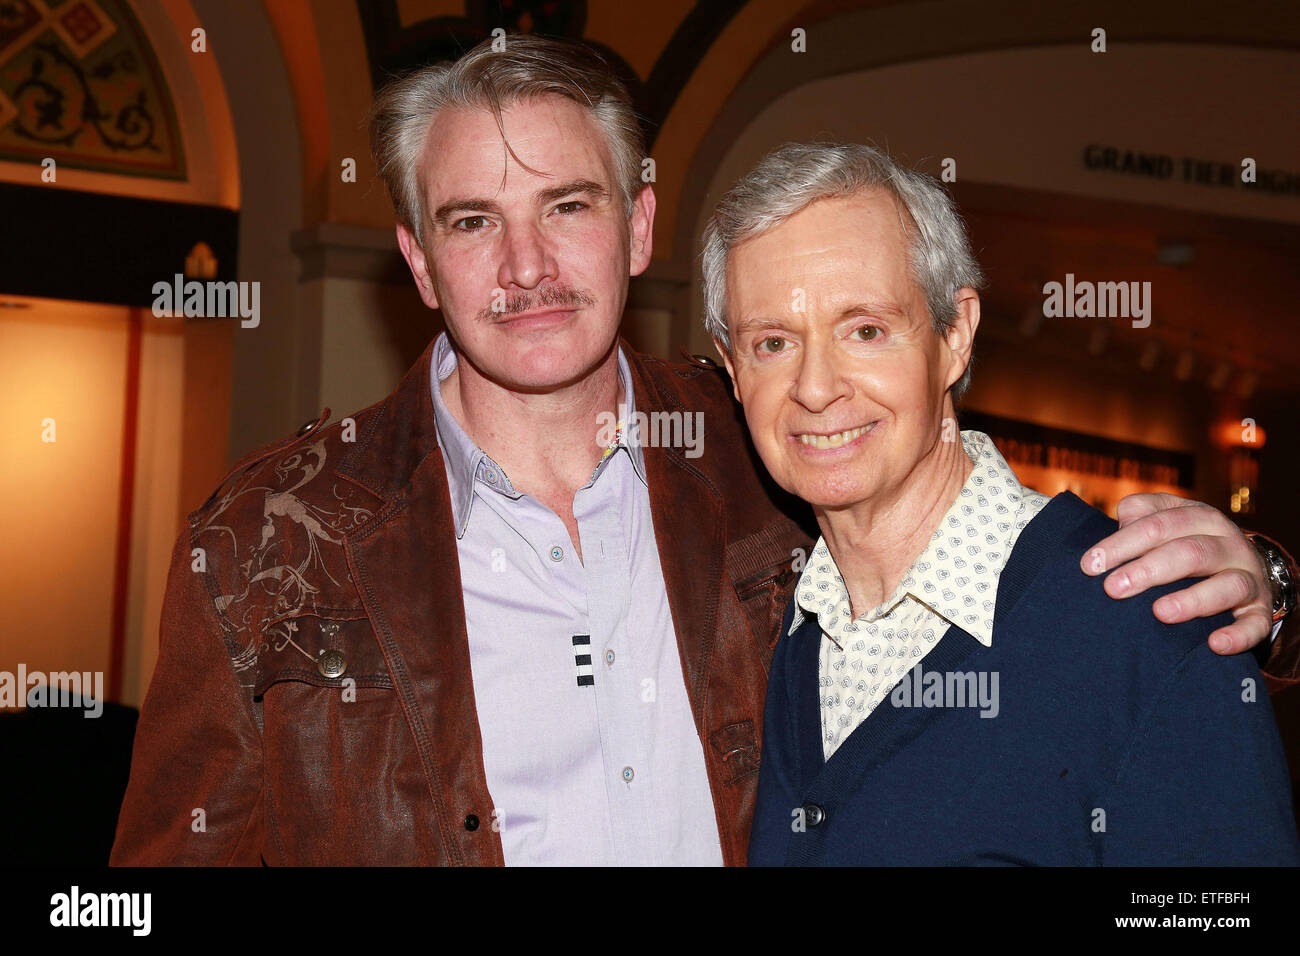 Closing night party for Encores! production of Lady Be Good at NY City Center.  Featuring: Douglas Sills, Guest Where: New York, New York, United States When: 09 Feb 2015 Credit: Joseph Marzullo/WENN.com Stock Photo